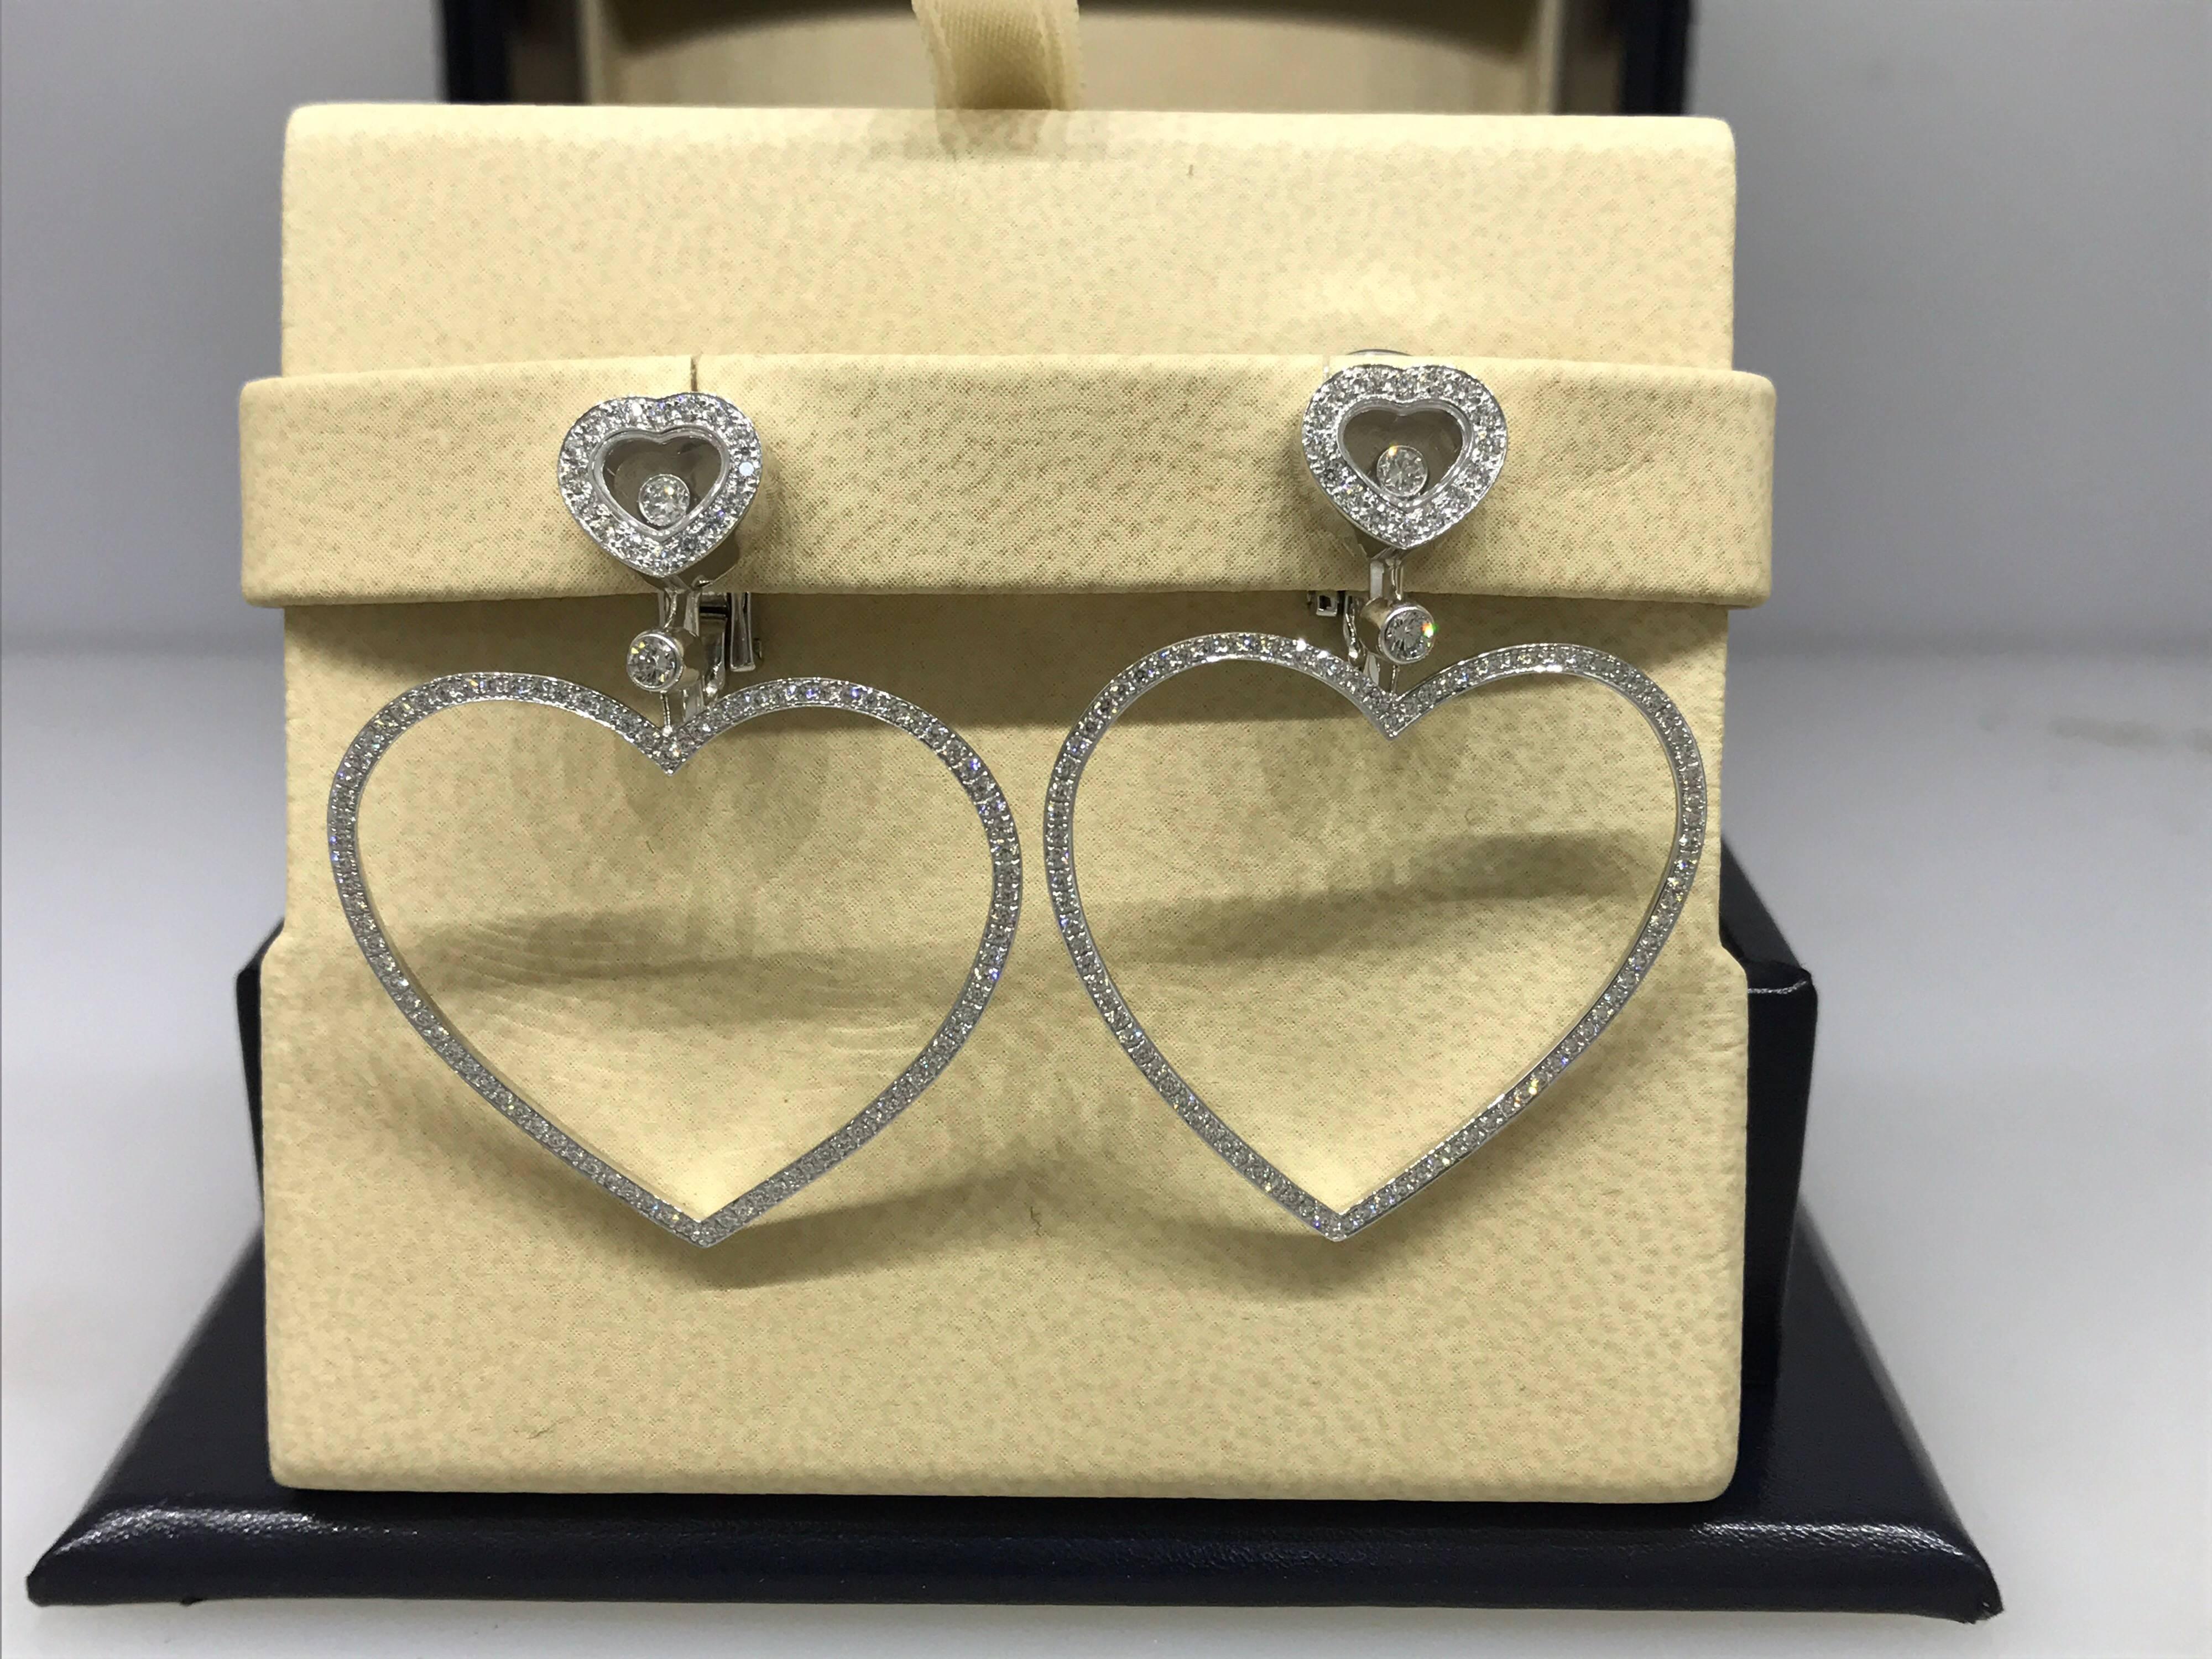 Chopard Happy Diamonds Large Heart Earrings

Model Number: 84/6467-1001

100% Authentic

Brand New

Comes with original Chopard box, certificate of authenticity and warranty, and jewels manual

18 Karat White Gold (13.60gr)

210 Diamonds total on